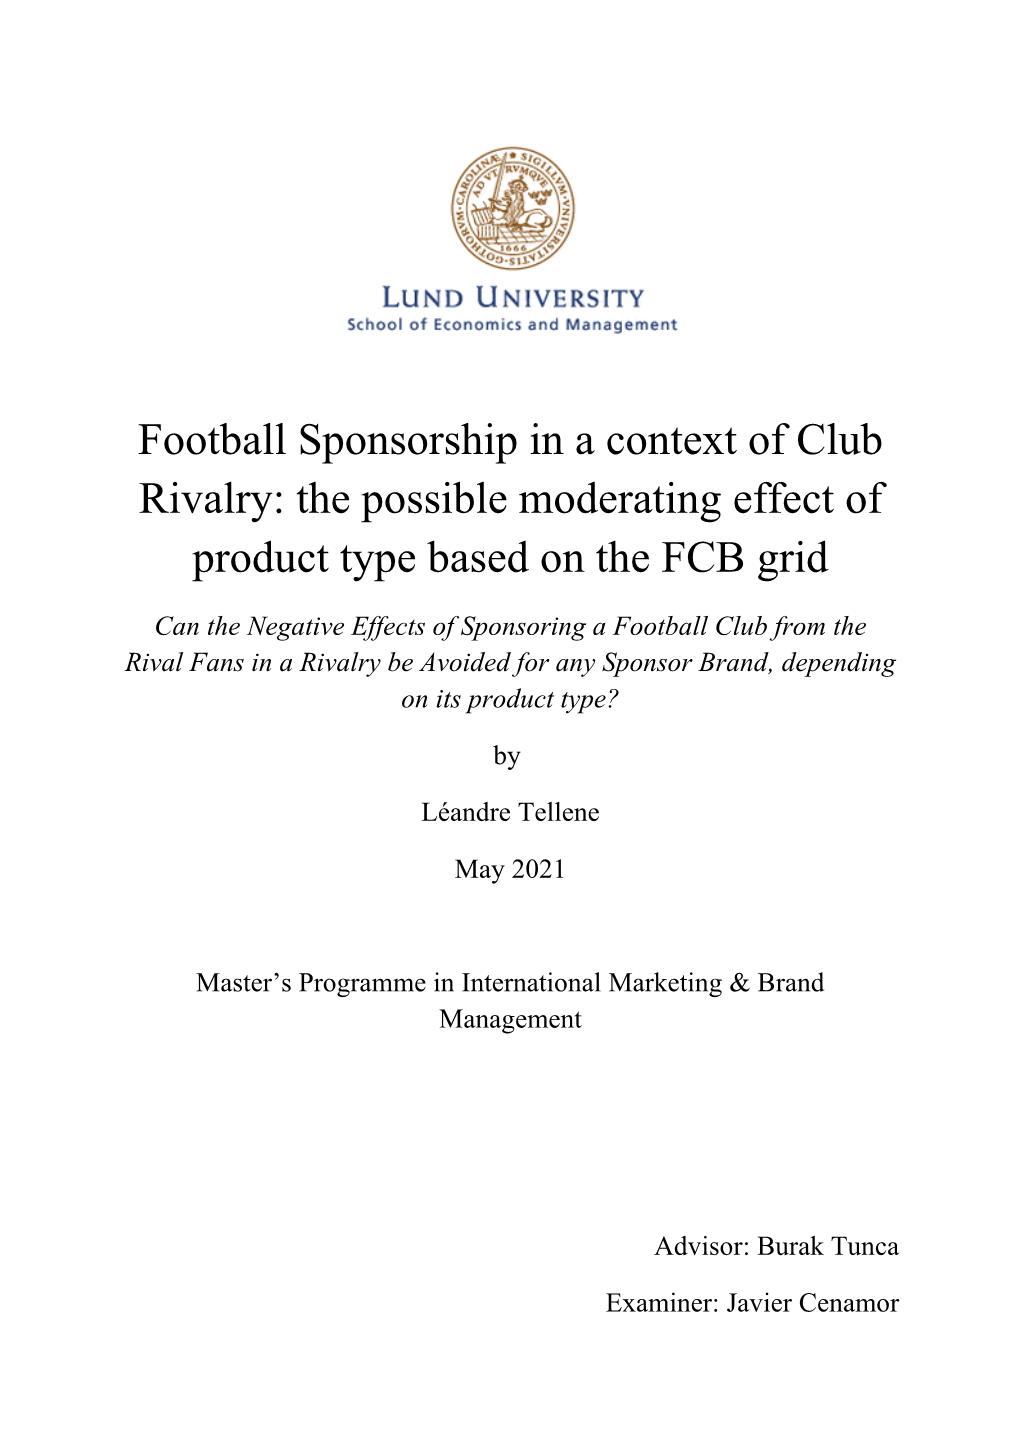 Football Sponsorship in a Context of Club Rivalry: the Possible Moderating Effect of Product Type Based on the FCB Grid